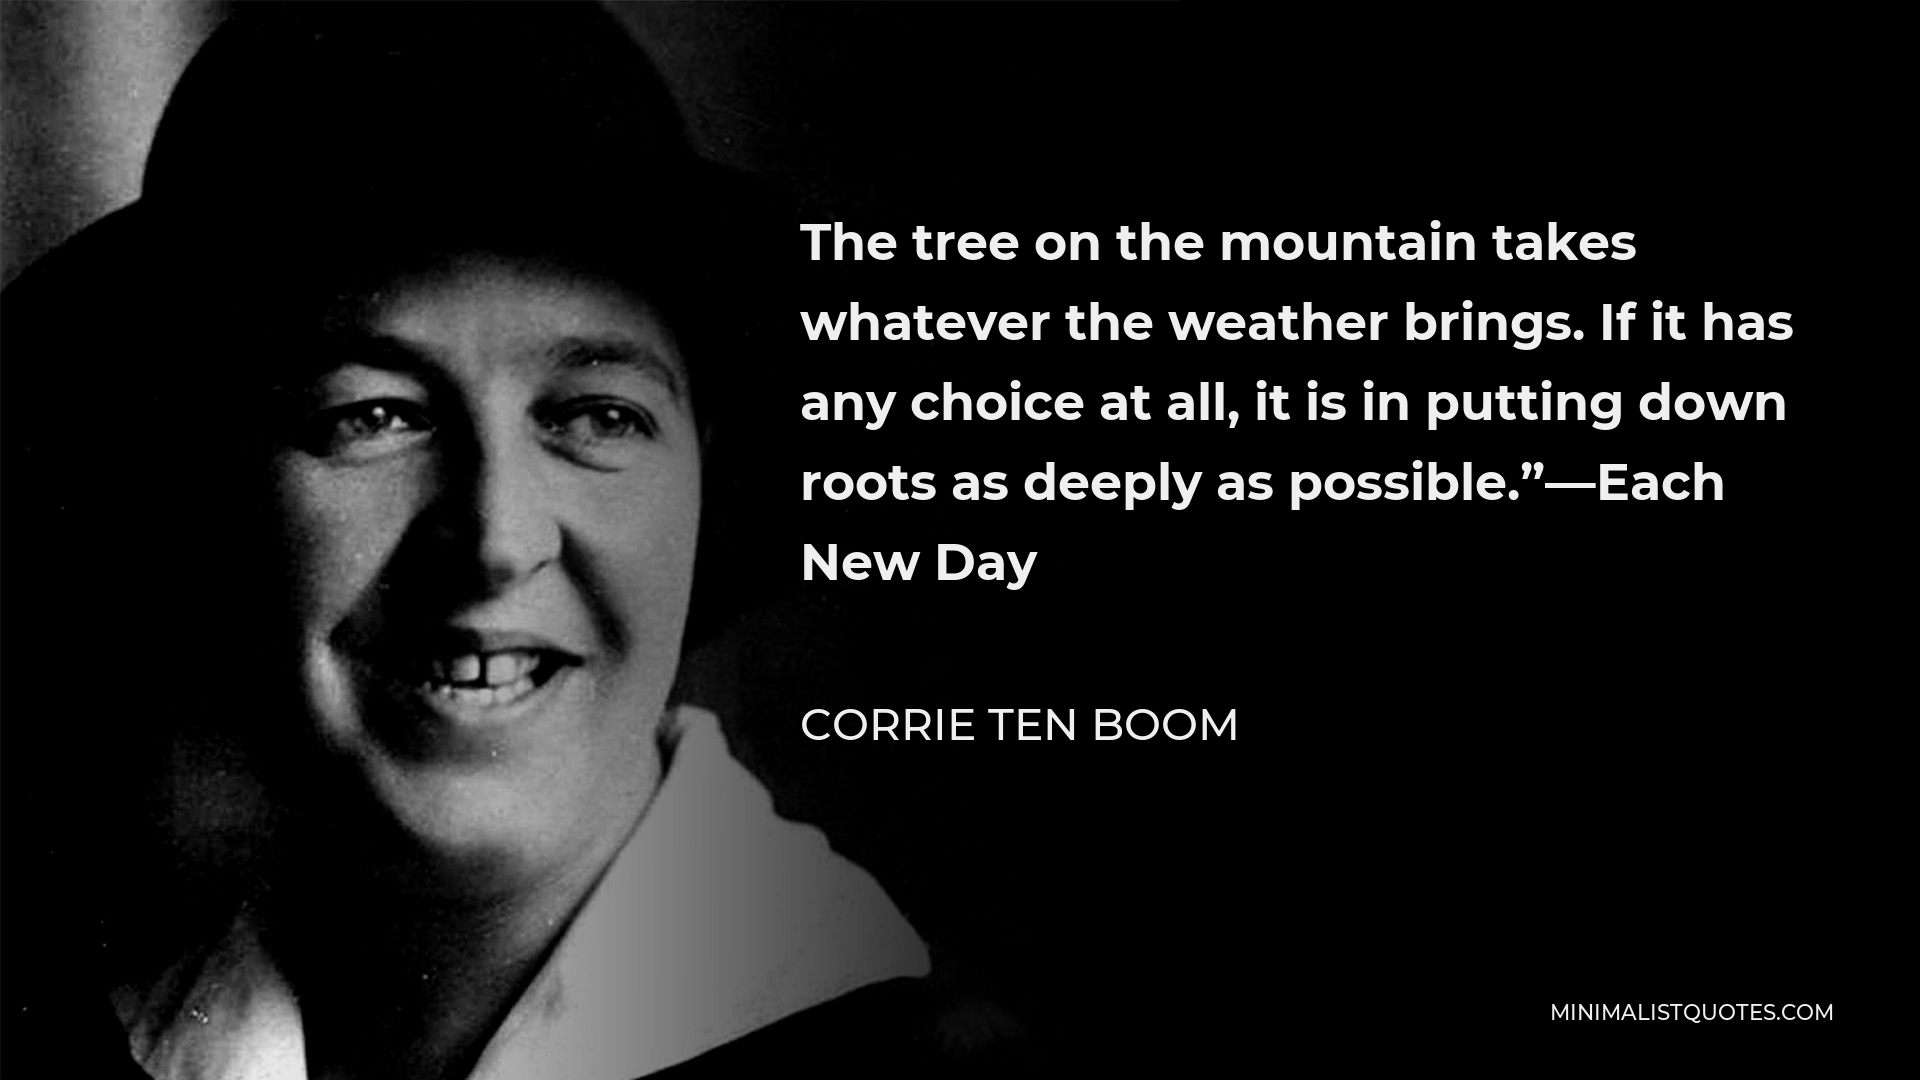 Corrie ten Boom Quote - The tree on the mountain takes whatever the weather brings. If it has any choice at all, it is in putting down roots as deeply as possible.”—Each New Day